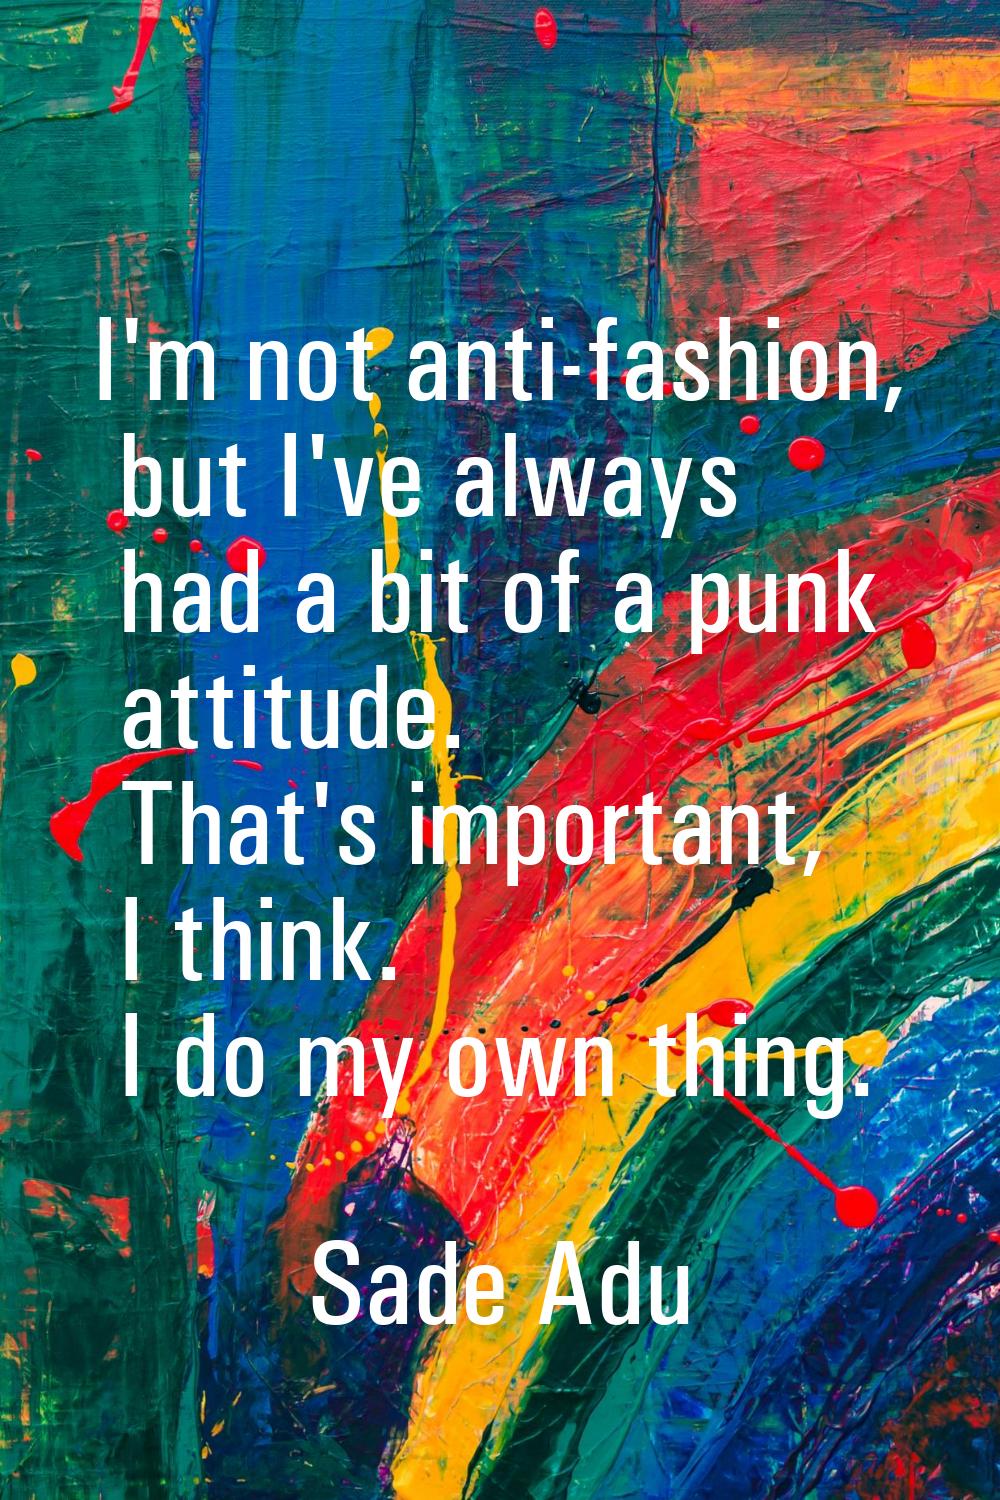 I'm not anti-fashion, but I've always had a bit of a punk attitude. That's important, I think. I do